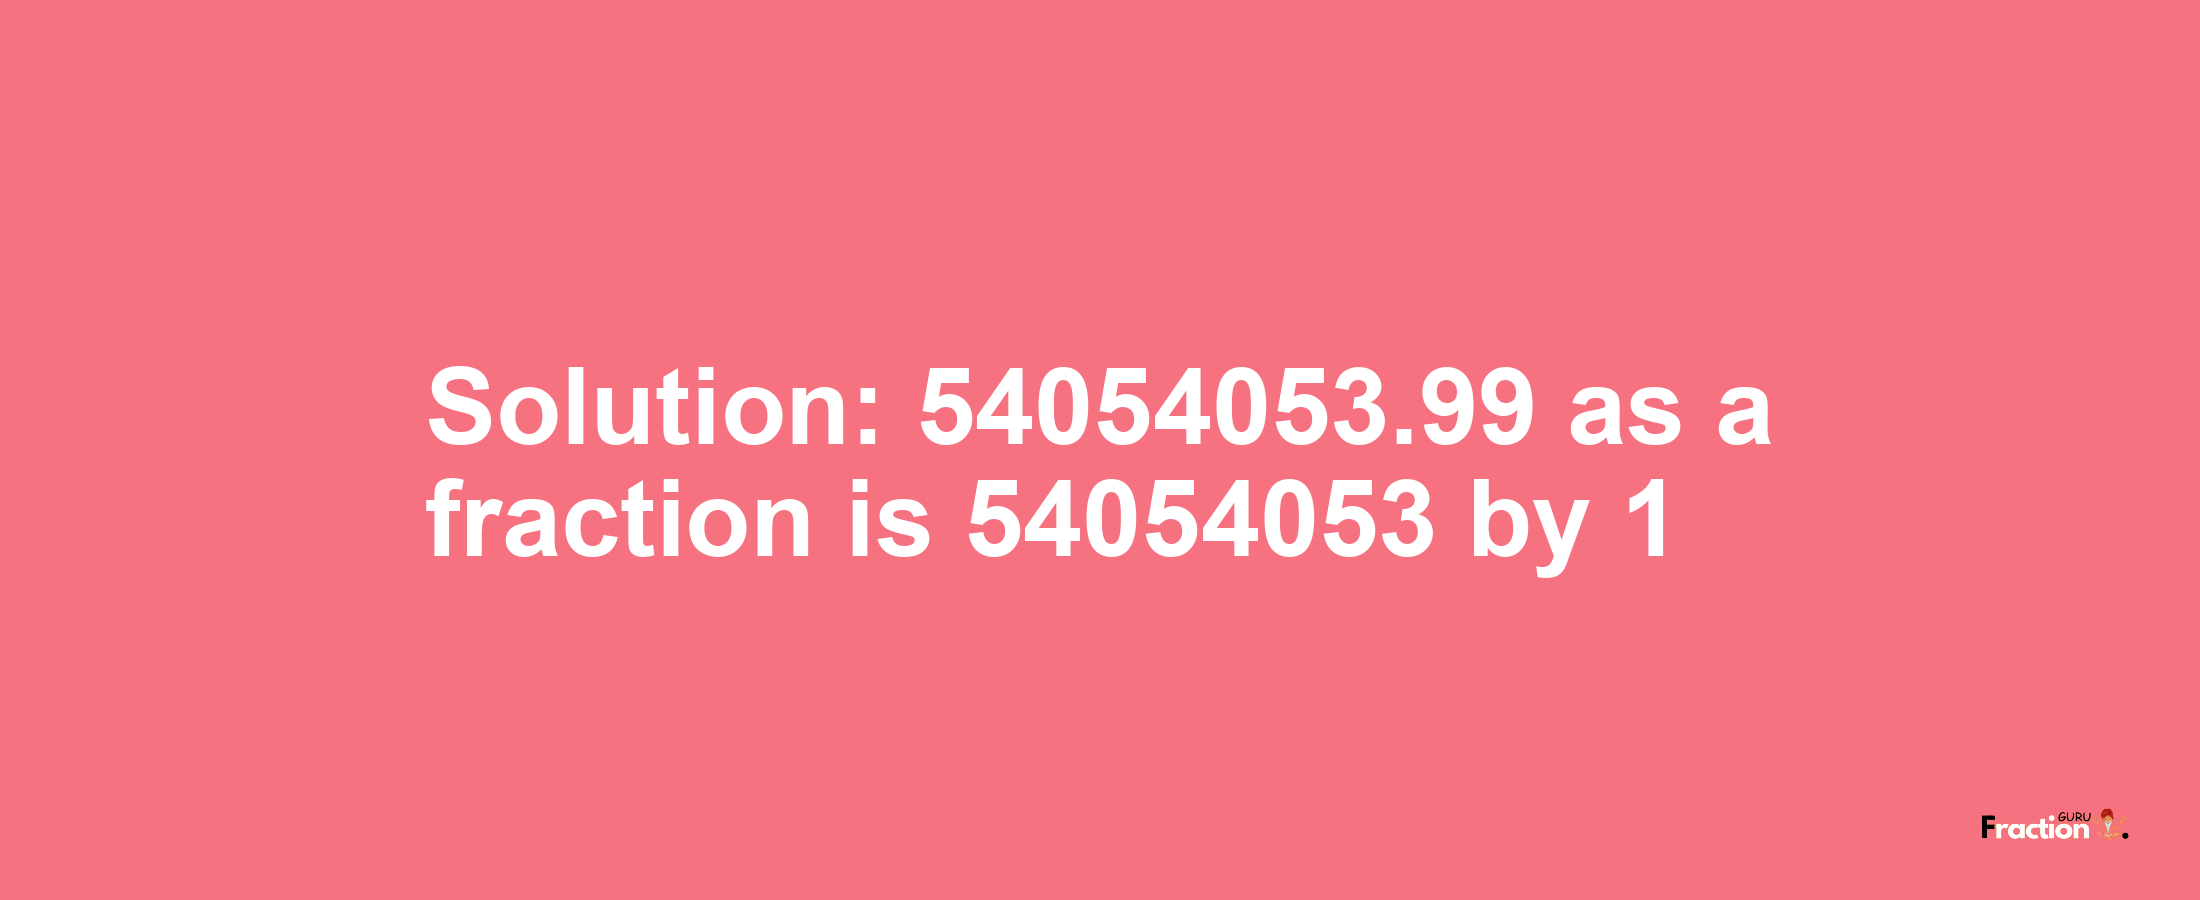 Solution:54054053.99 as a fraction is 54054053/1